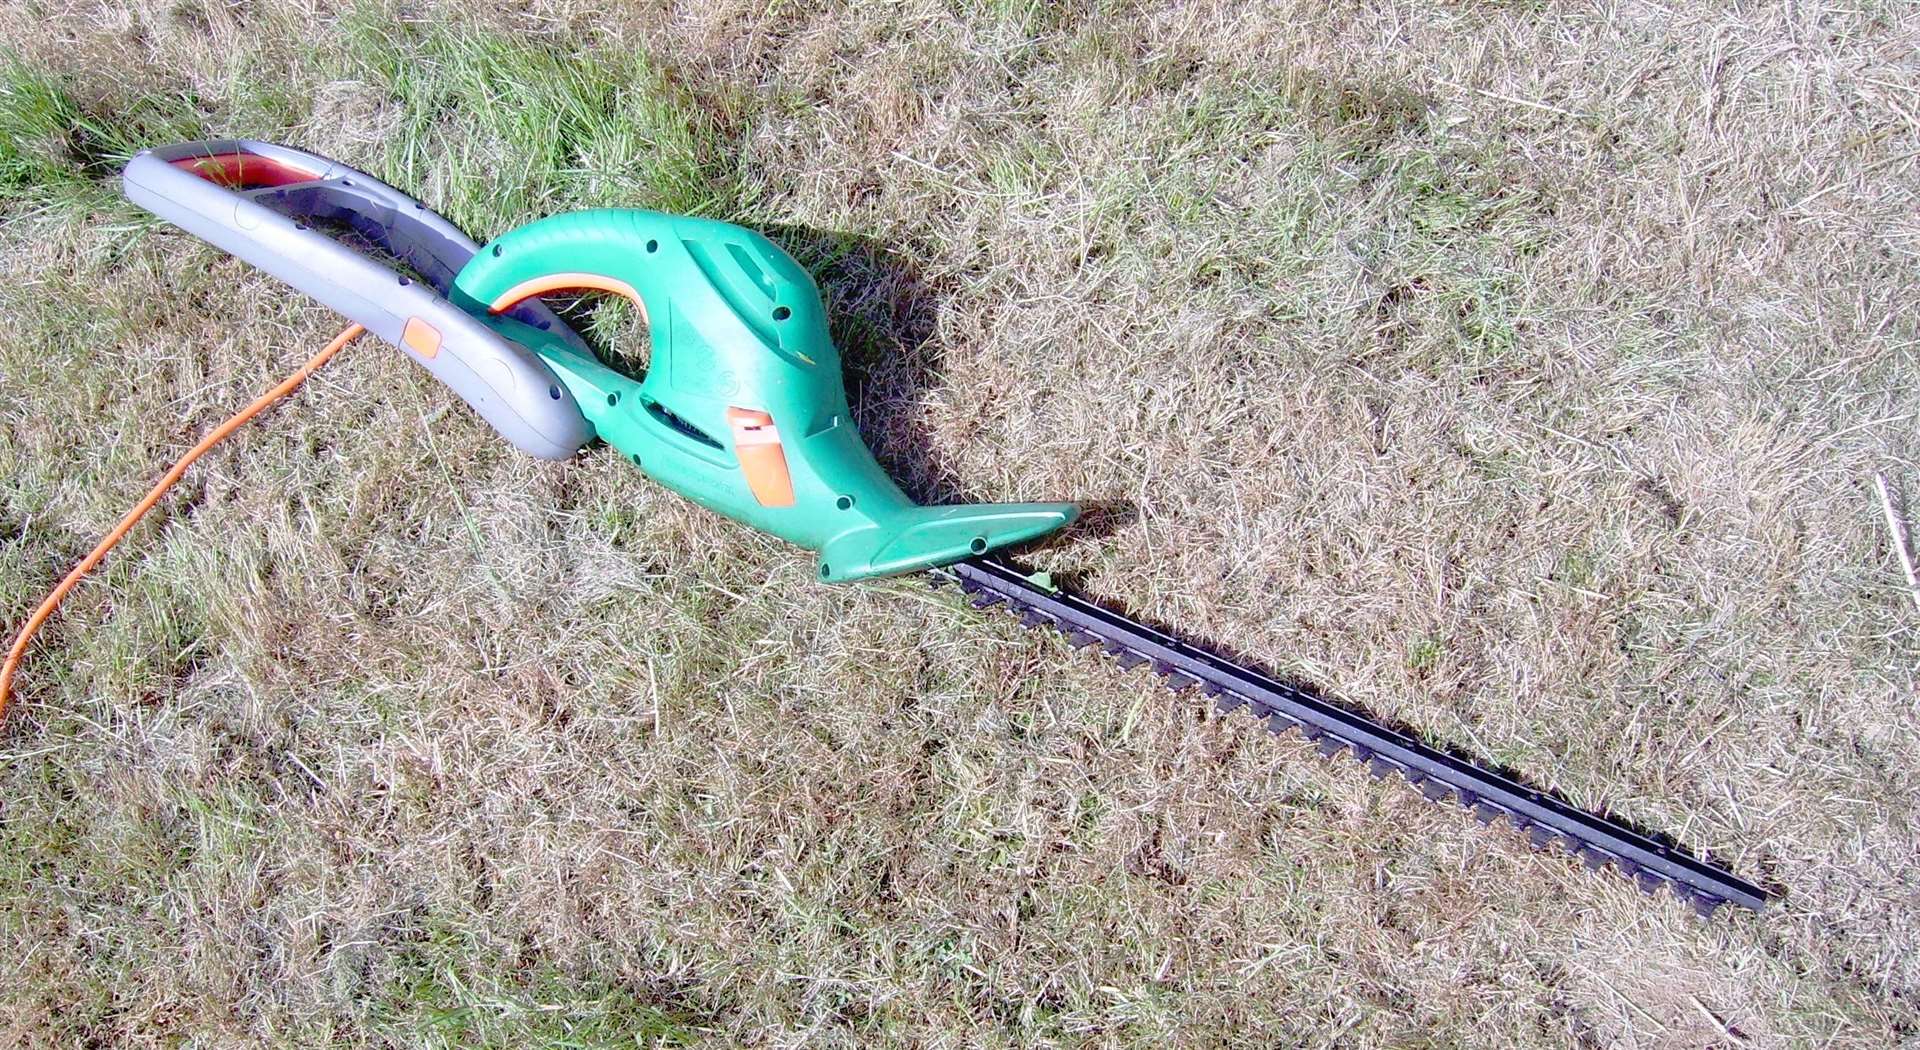 An example of a hedge trimmer. Stock Image: Wikimedia Commons